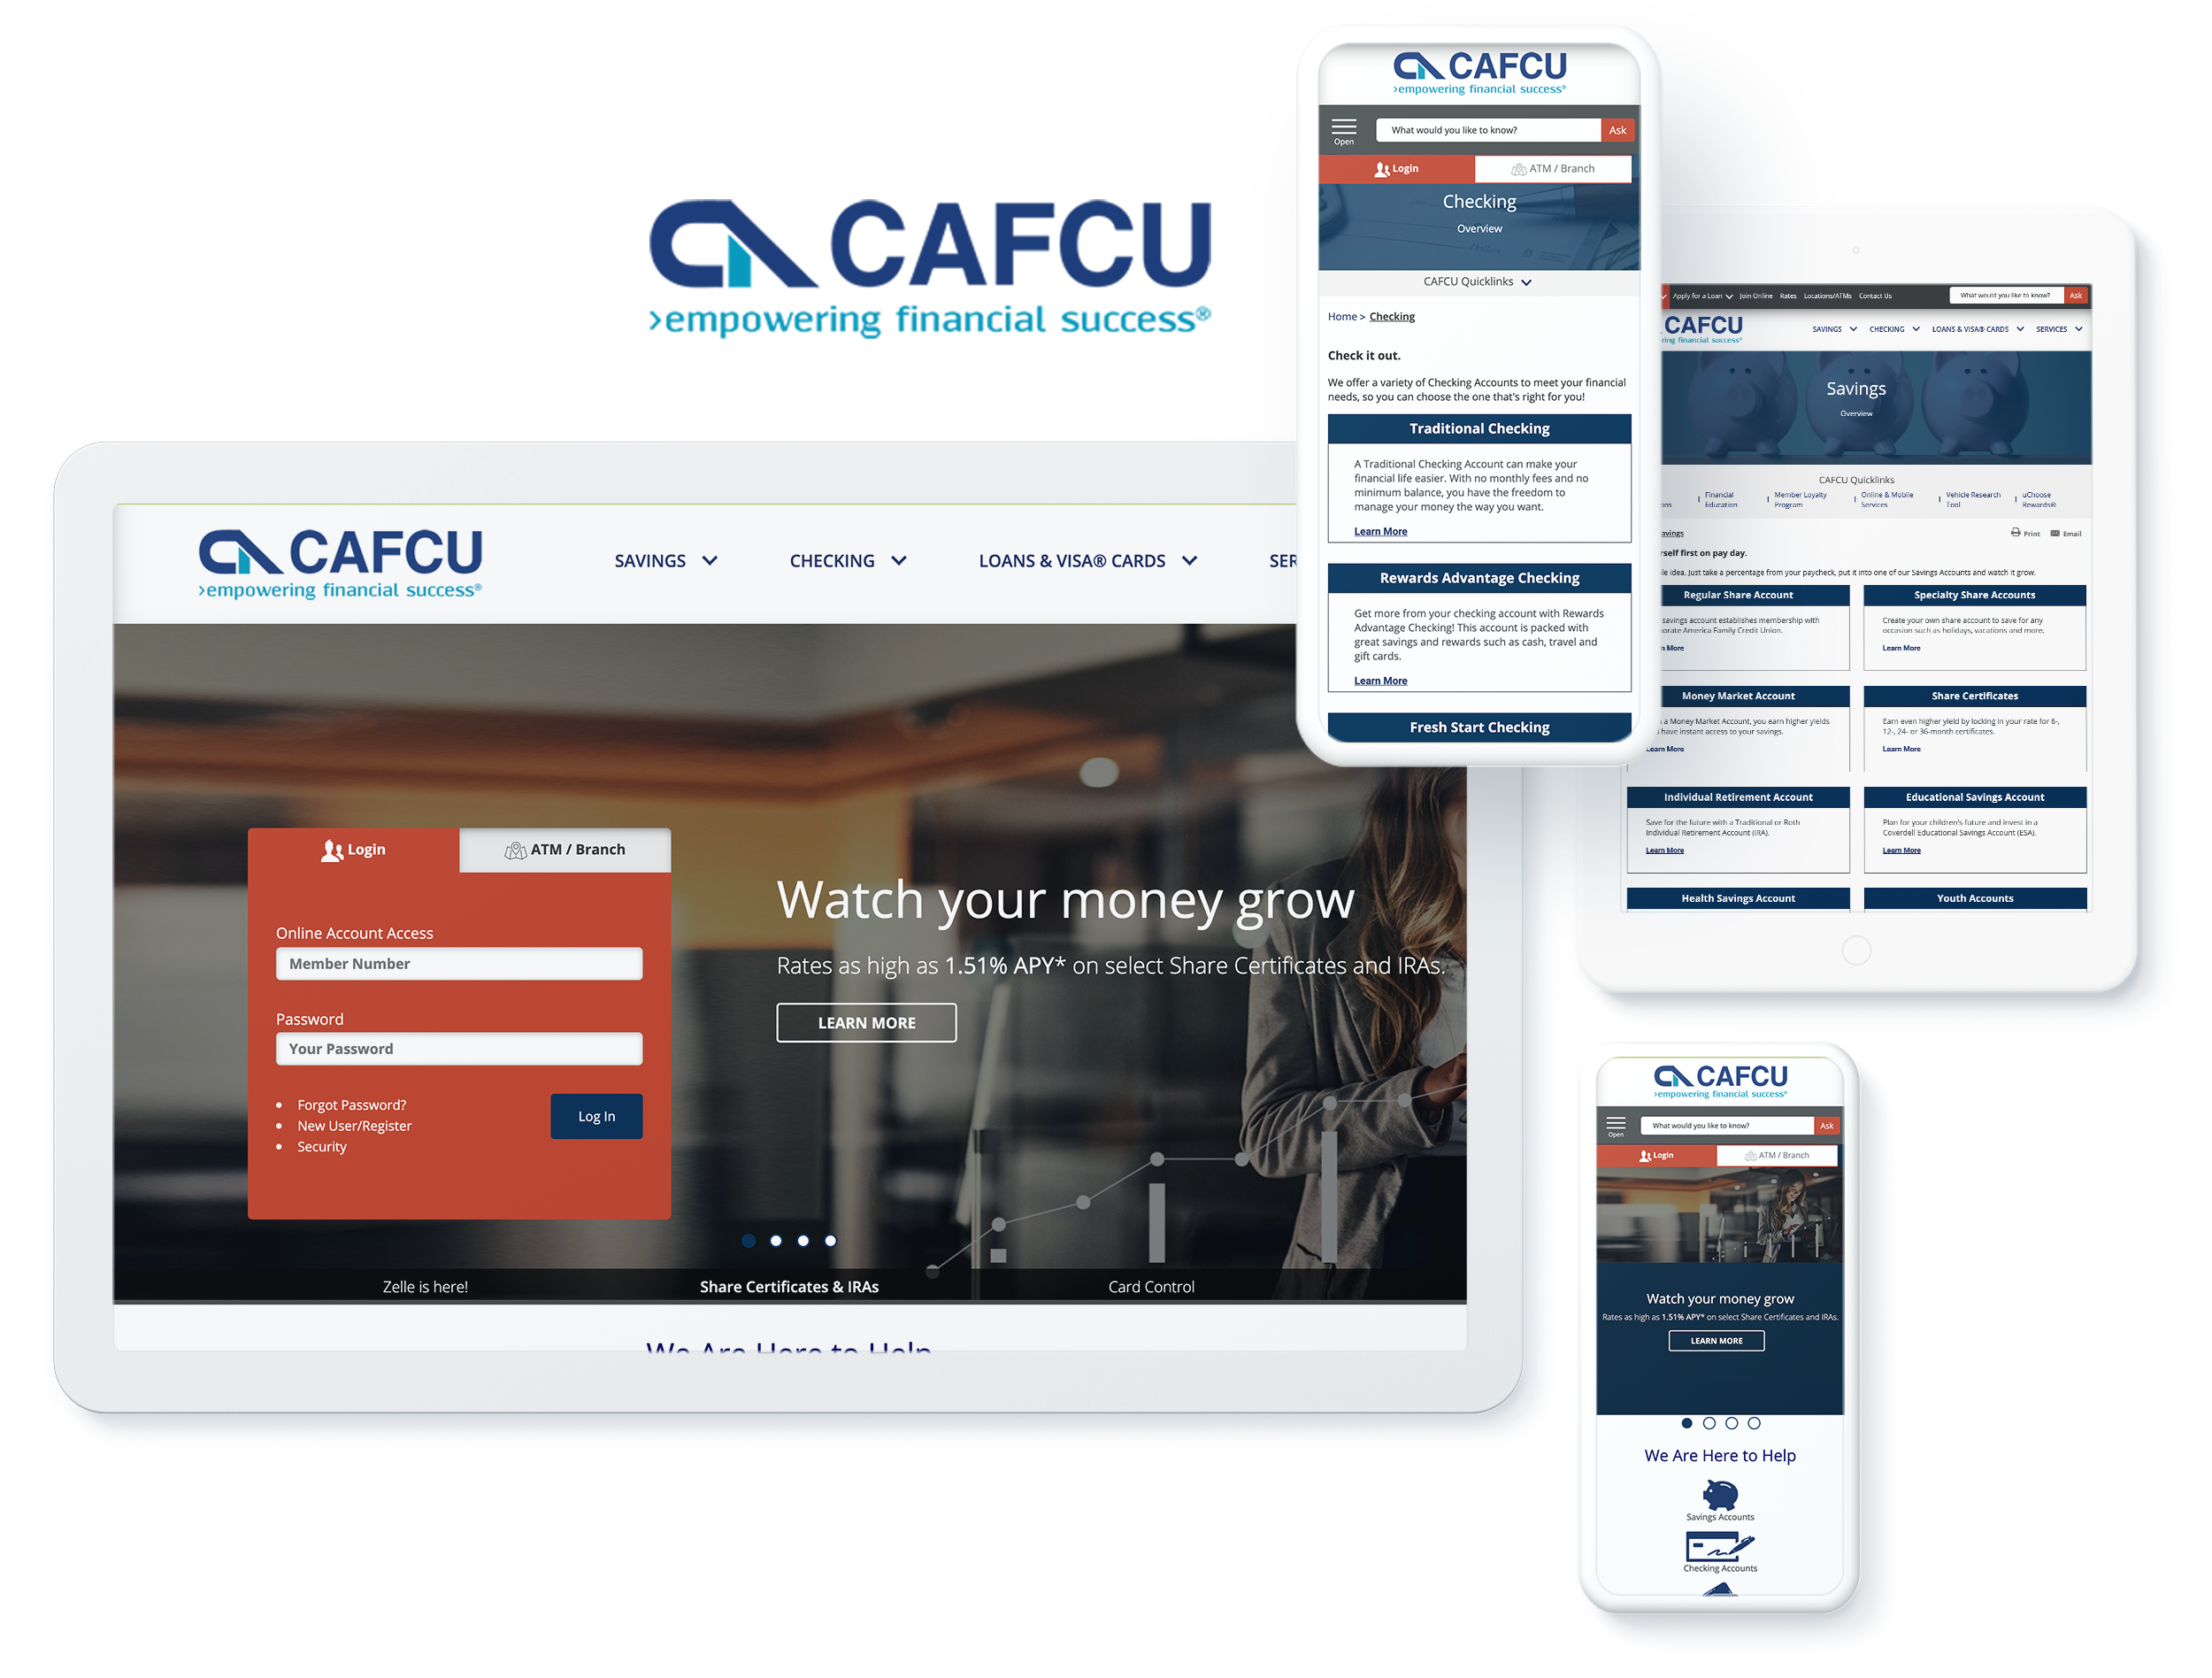 Cross-device view of CAFCU online banking portal featuring login and account options.